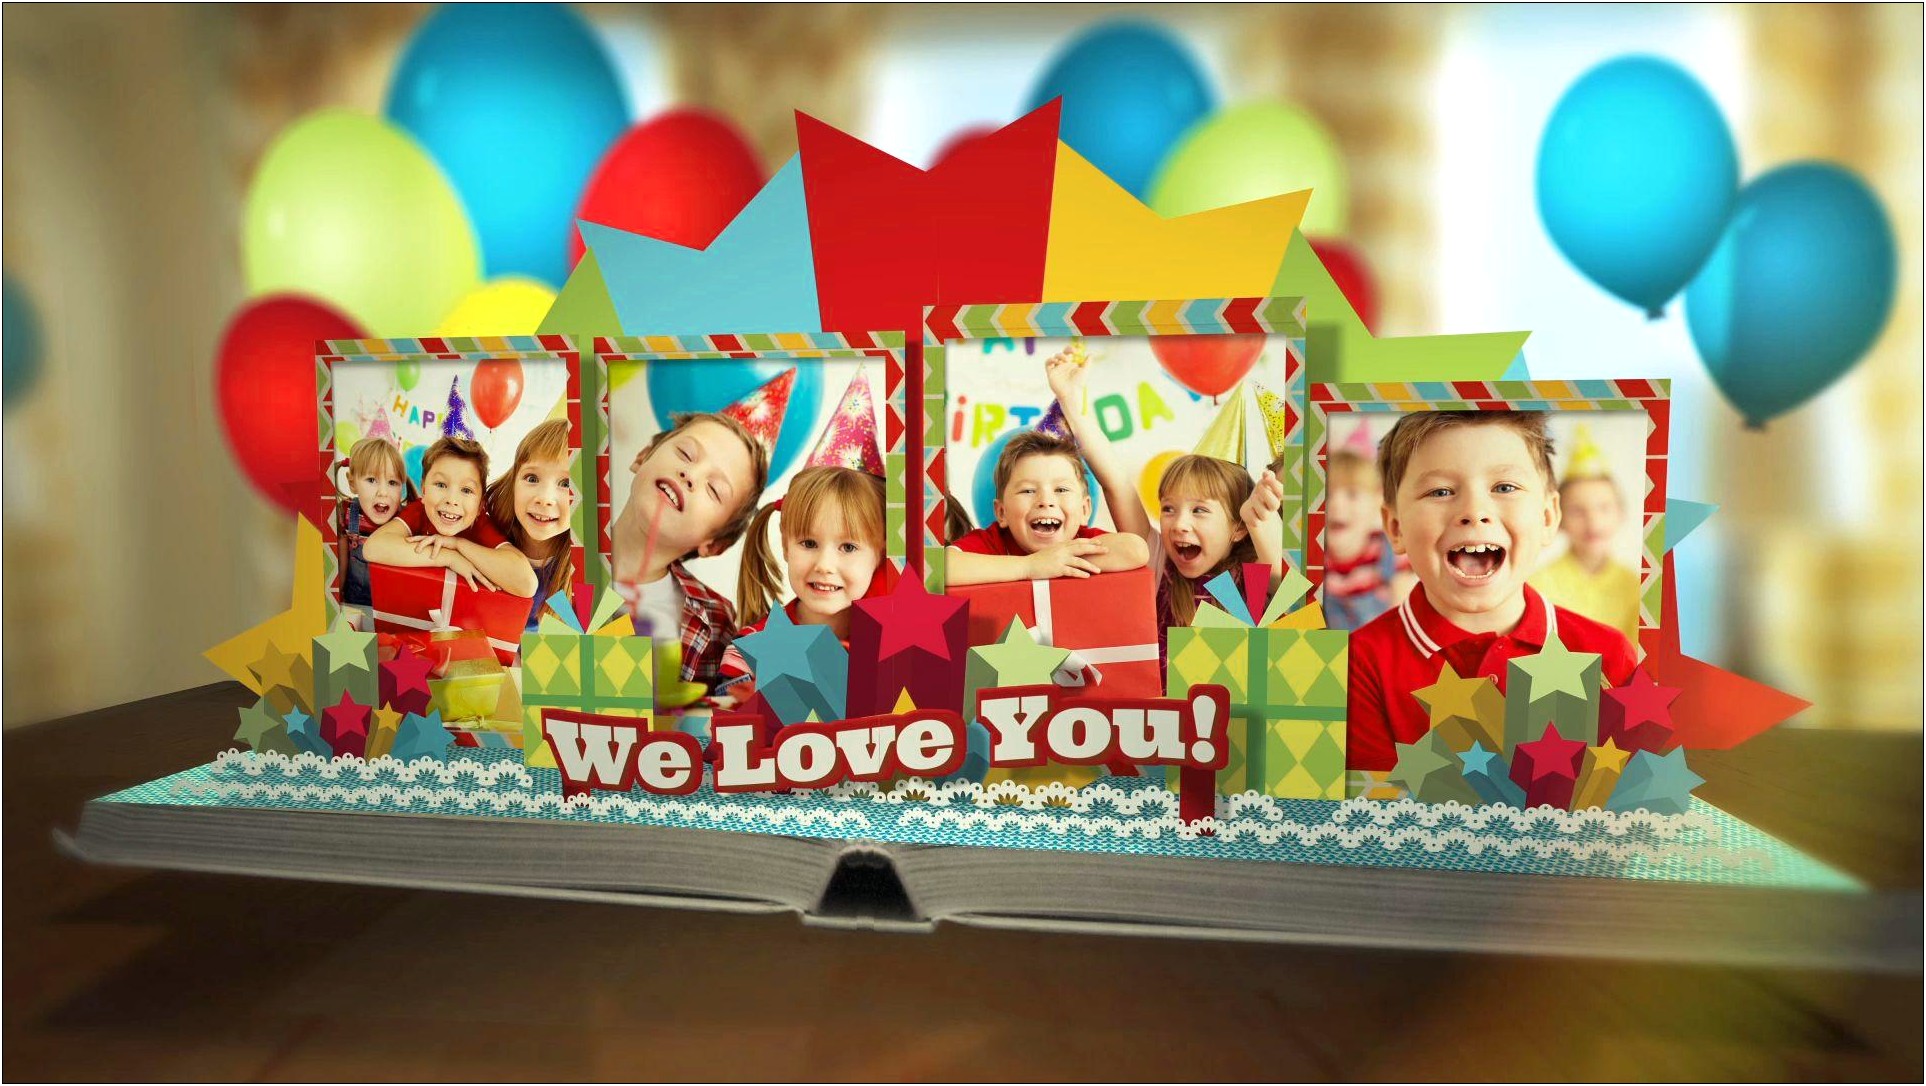 happy birthday title after effects template free download